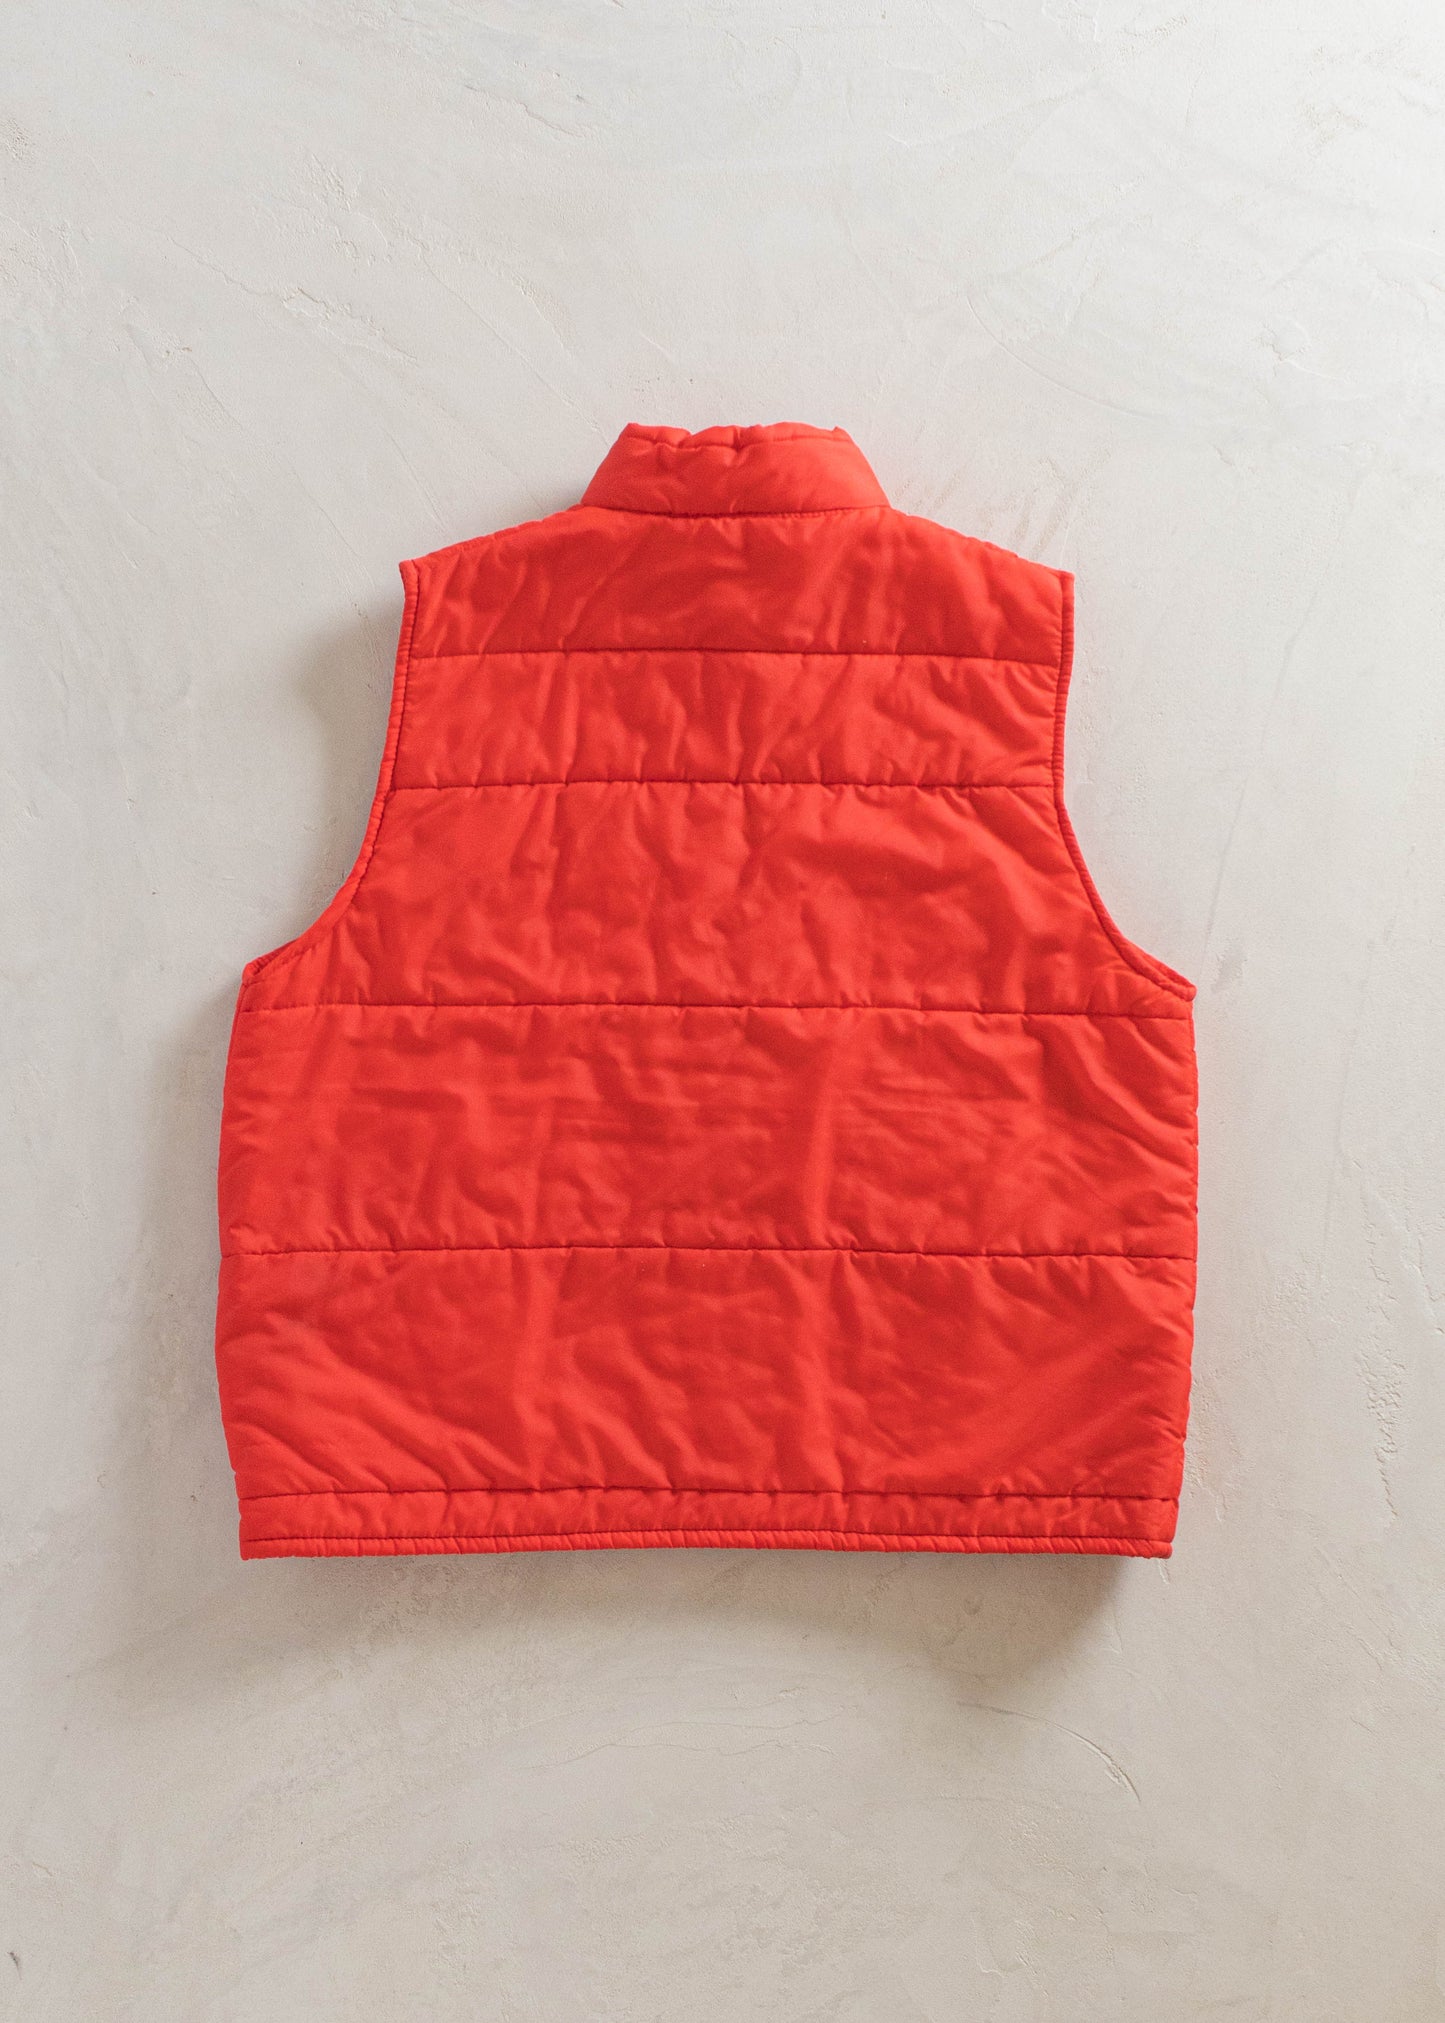 1970s Tuf Topper Quilted Nylon Vest Size M/L